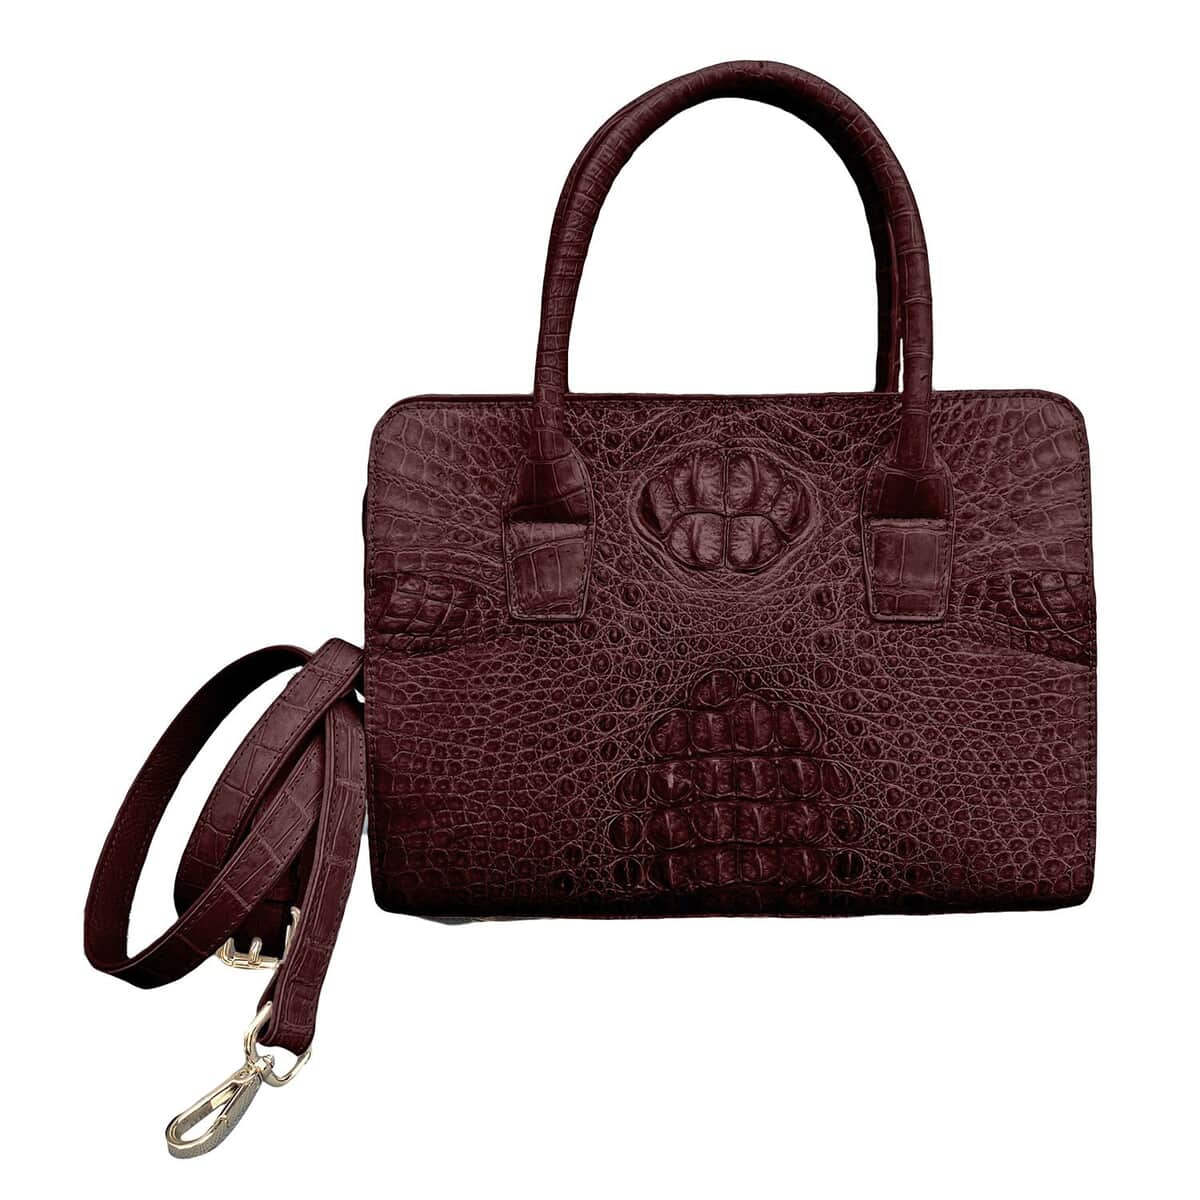 Grand Pelle Genuine Crocodile Leather Dark Chocolate Tote Bag (11"x4.3"x7.9") with Detachable Shoulder Strap image number 0